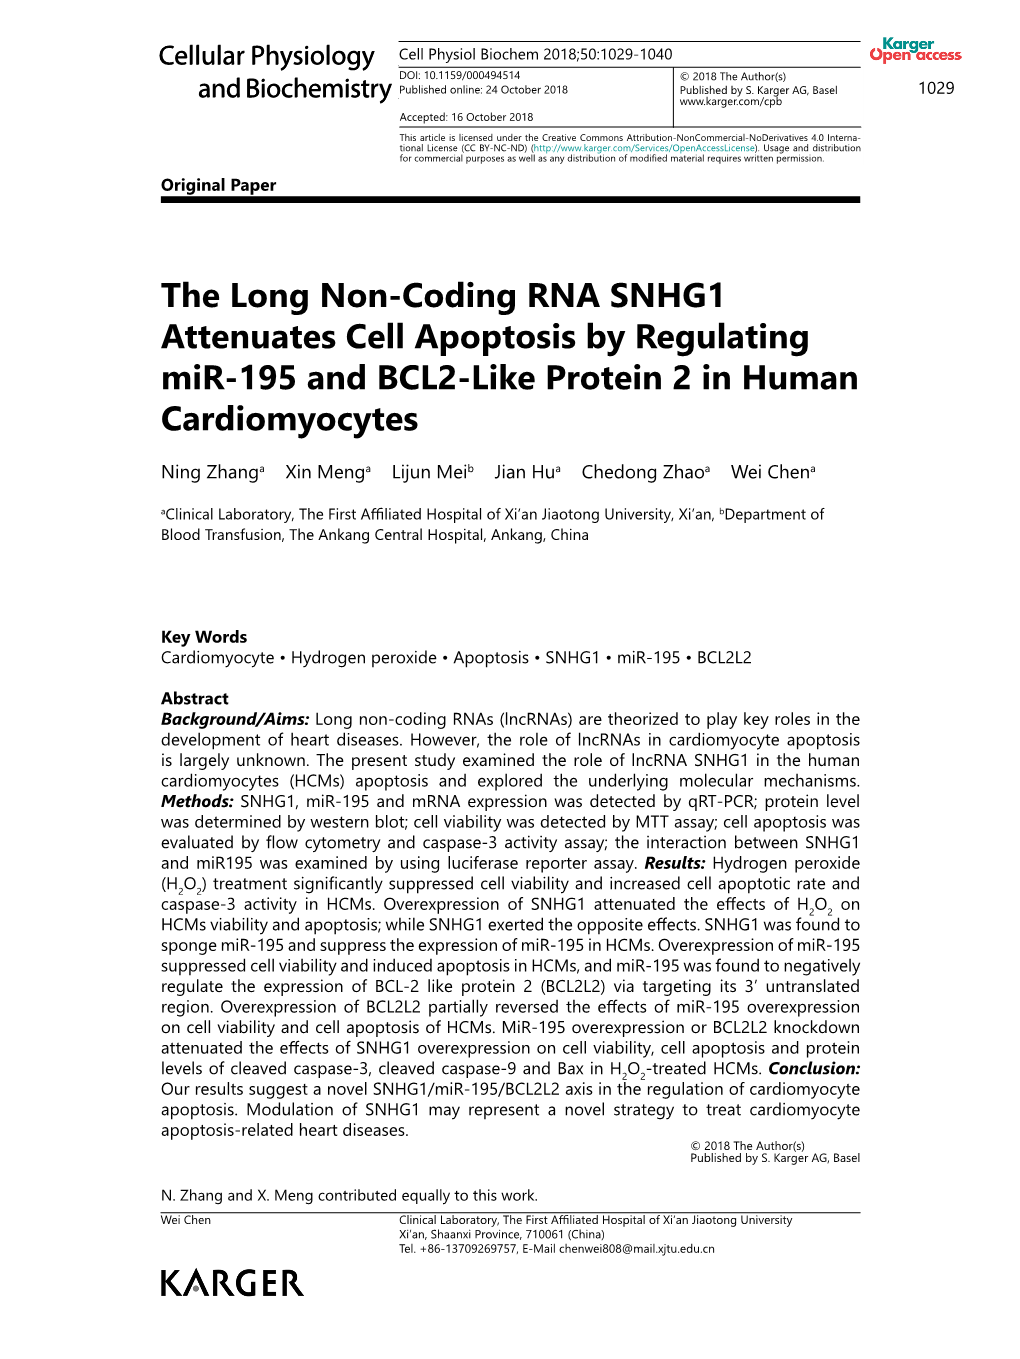 The Long Non-Coding RNA SNHG1 Attenuates Cell Apoptosis by Regulating Mir-195 and BCL2-Like Protein 2 in Human Cardiomyocytes